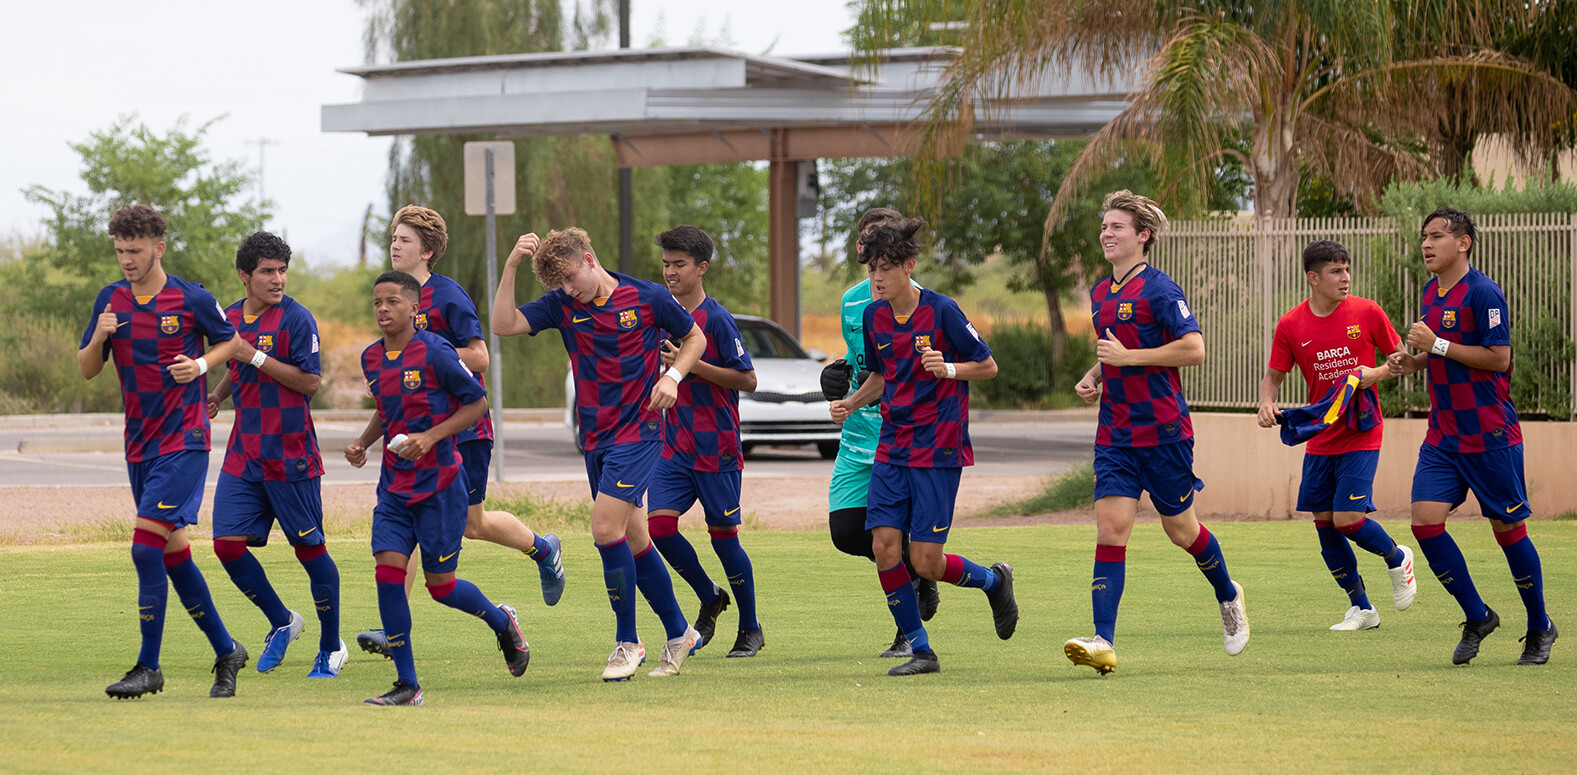 Barca Residency Academy U-17s running out the field at Grande Spots World